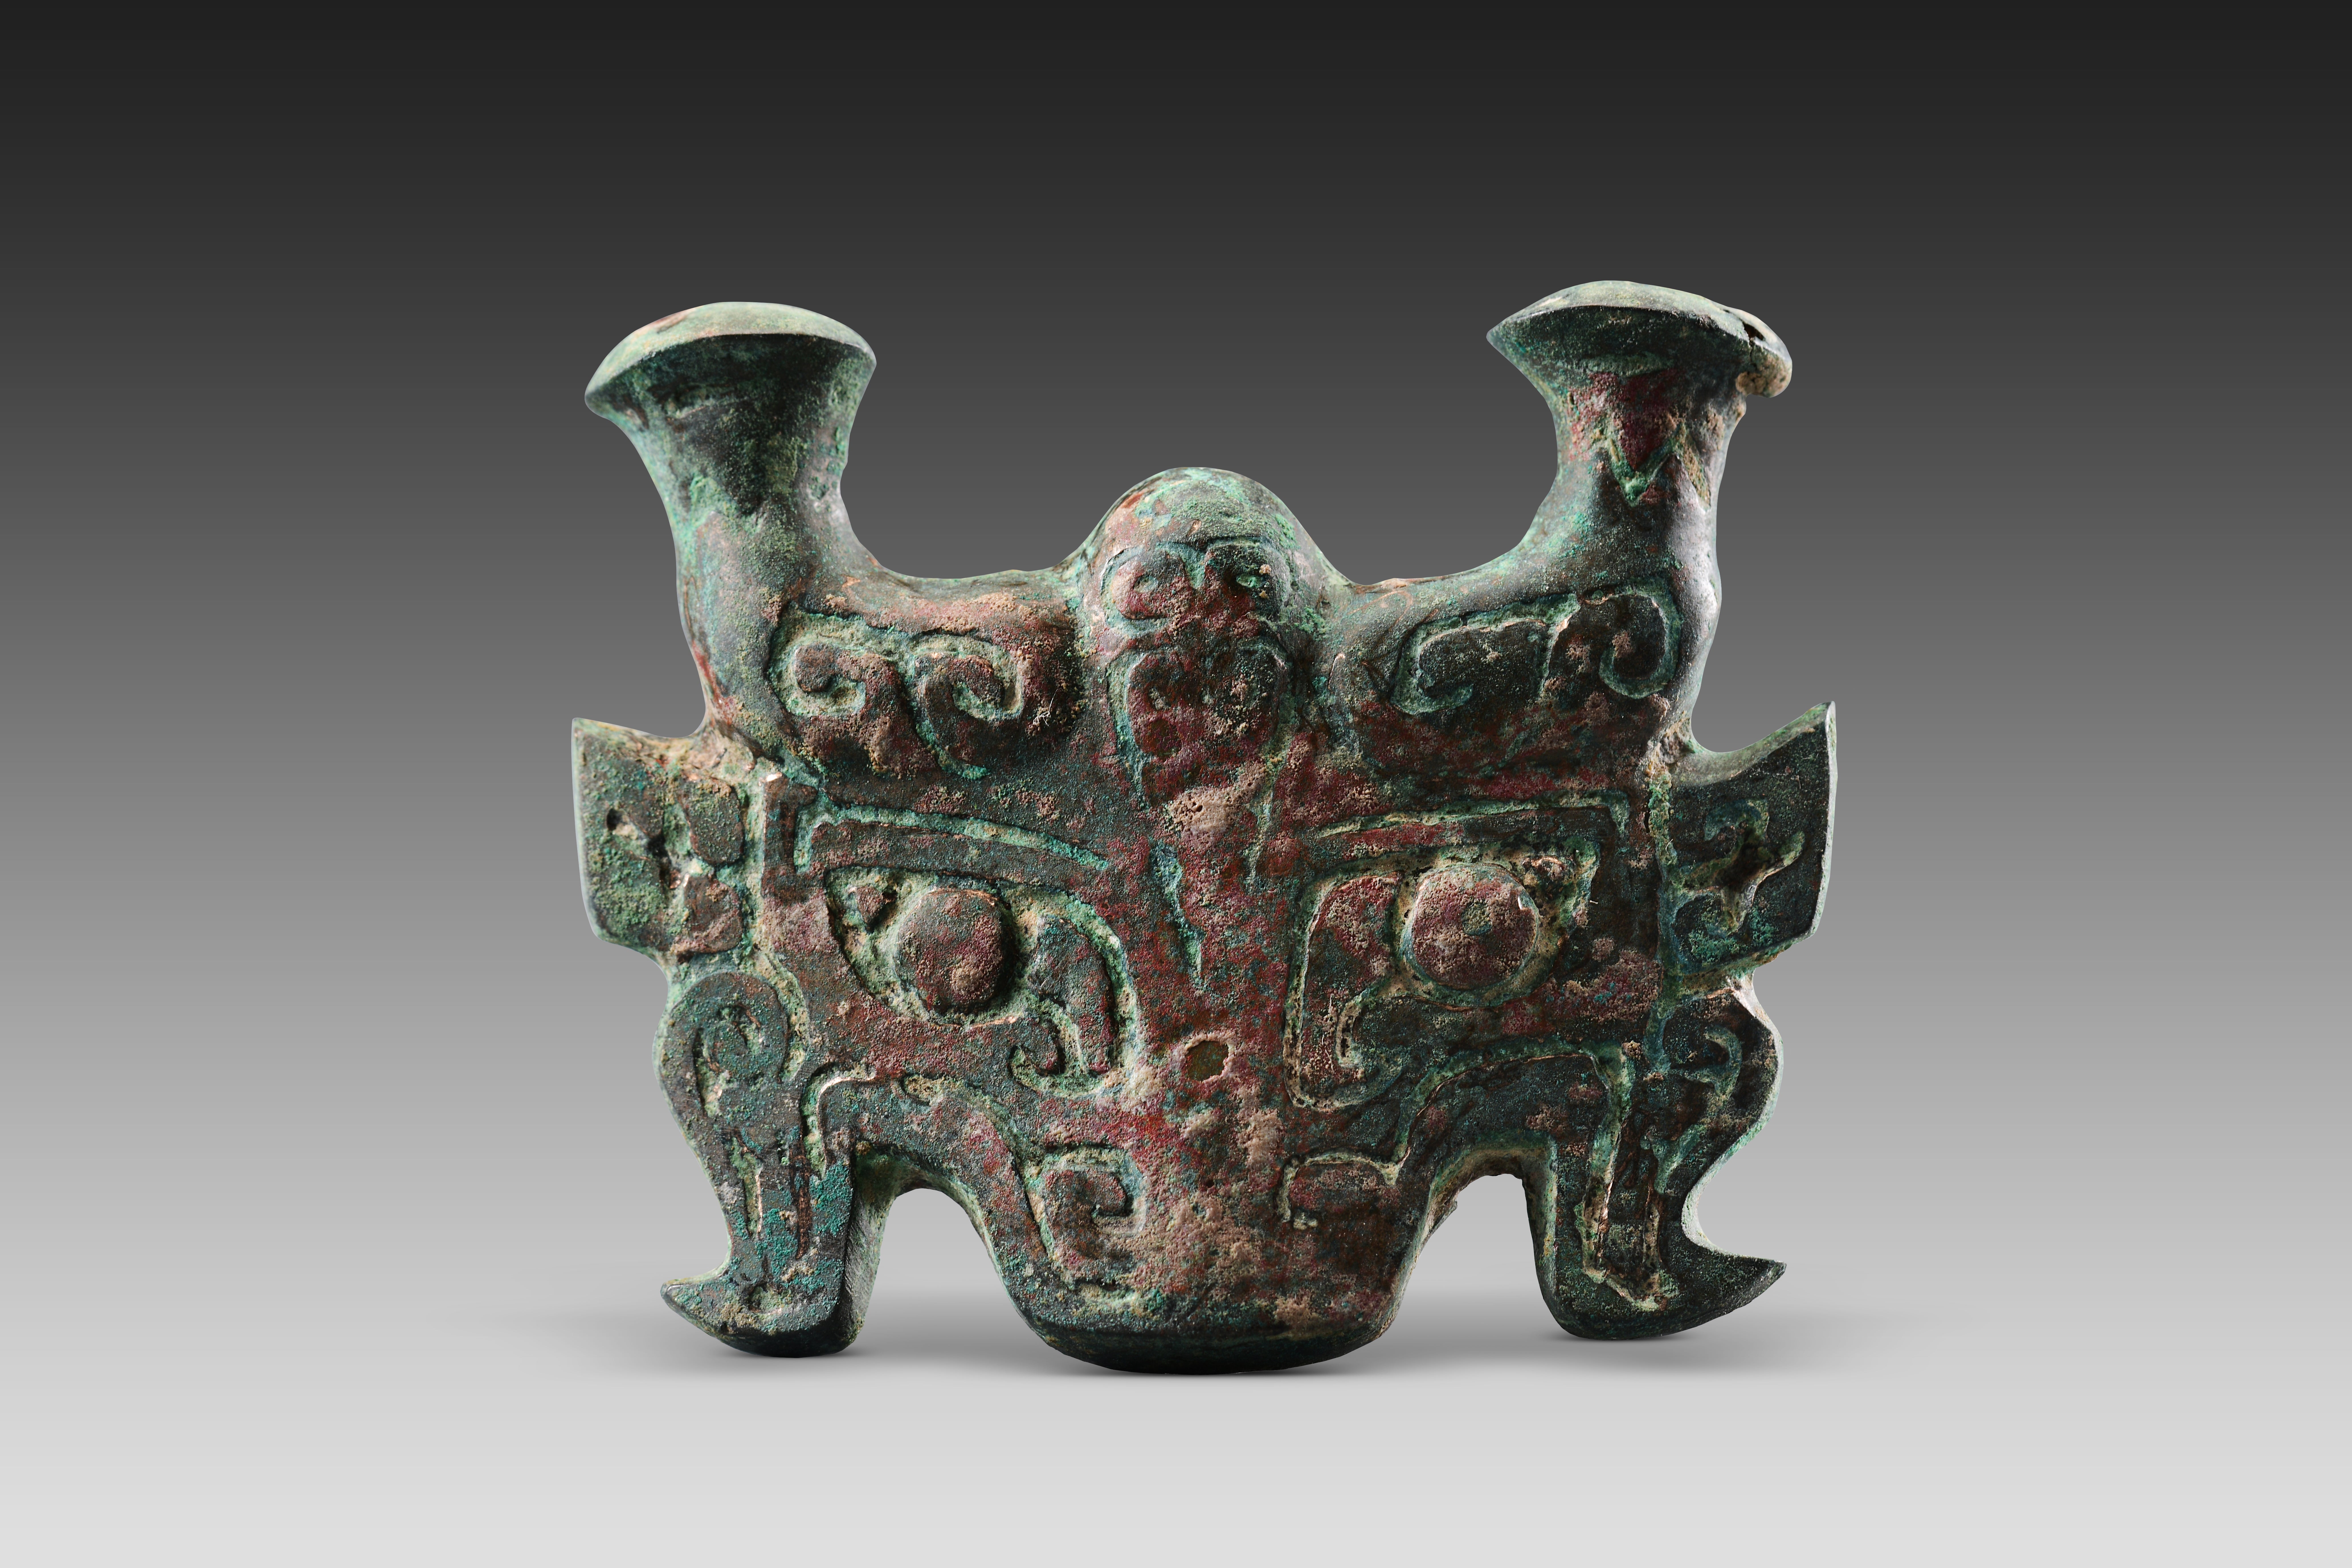 A bronze component of a carriage in the shape of a beast face discovered in tombs of the Zhaigou site, Qingjian county, Yulin, Shaanxi province